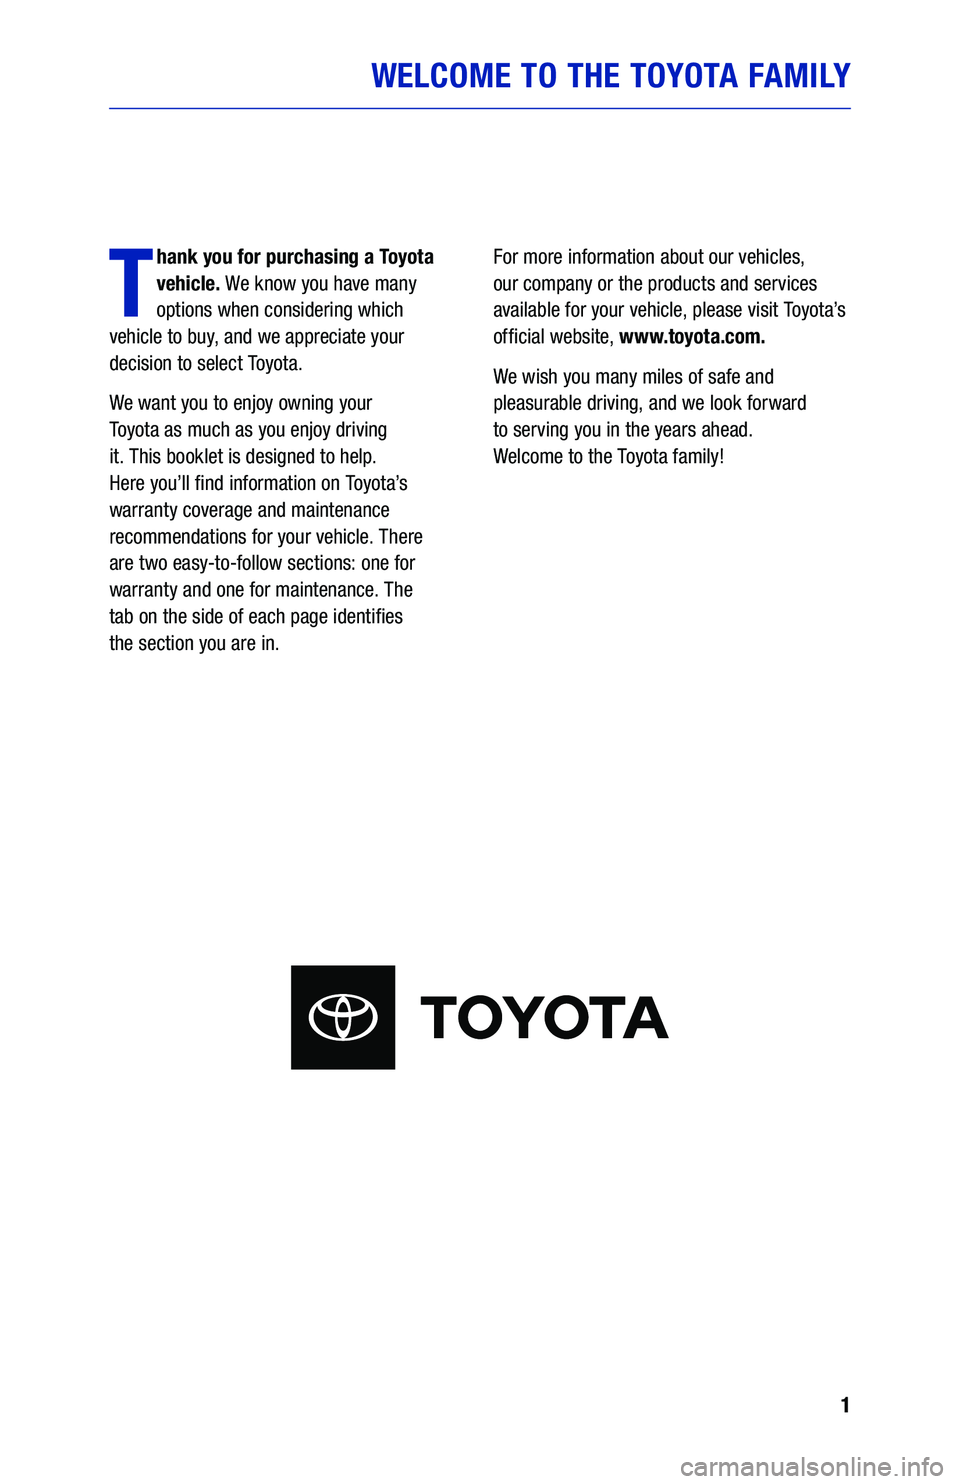 TOYOTA CAMRY 2021  Warranties & Maintenance Guides (in English) 1
WELCOME TO THE TOYOTA FAMILY
T
hank you for purchasing a Toyota 
vehicle. We know you have many 
options when considering which  
vehicle to buy, and we appreciate your 
decision to select Toyota.
W